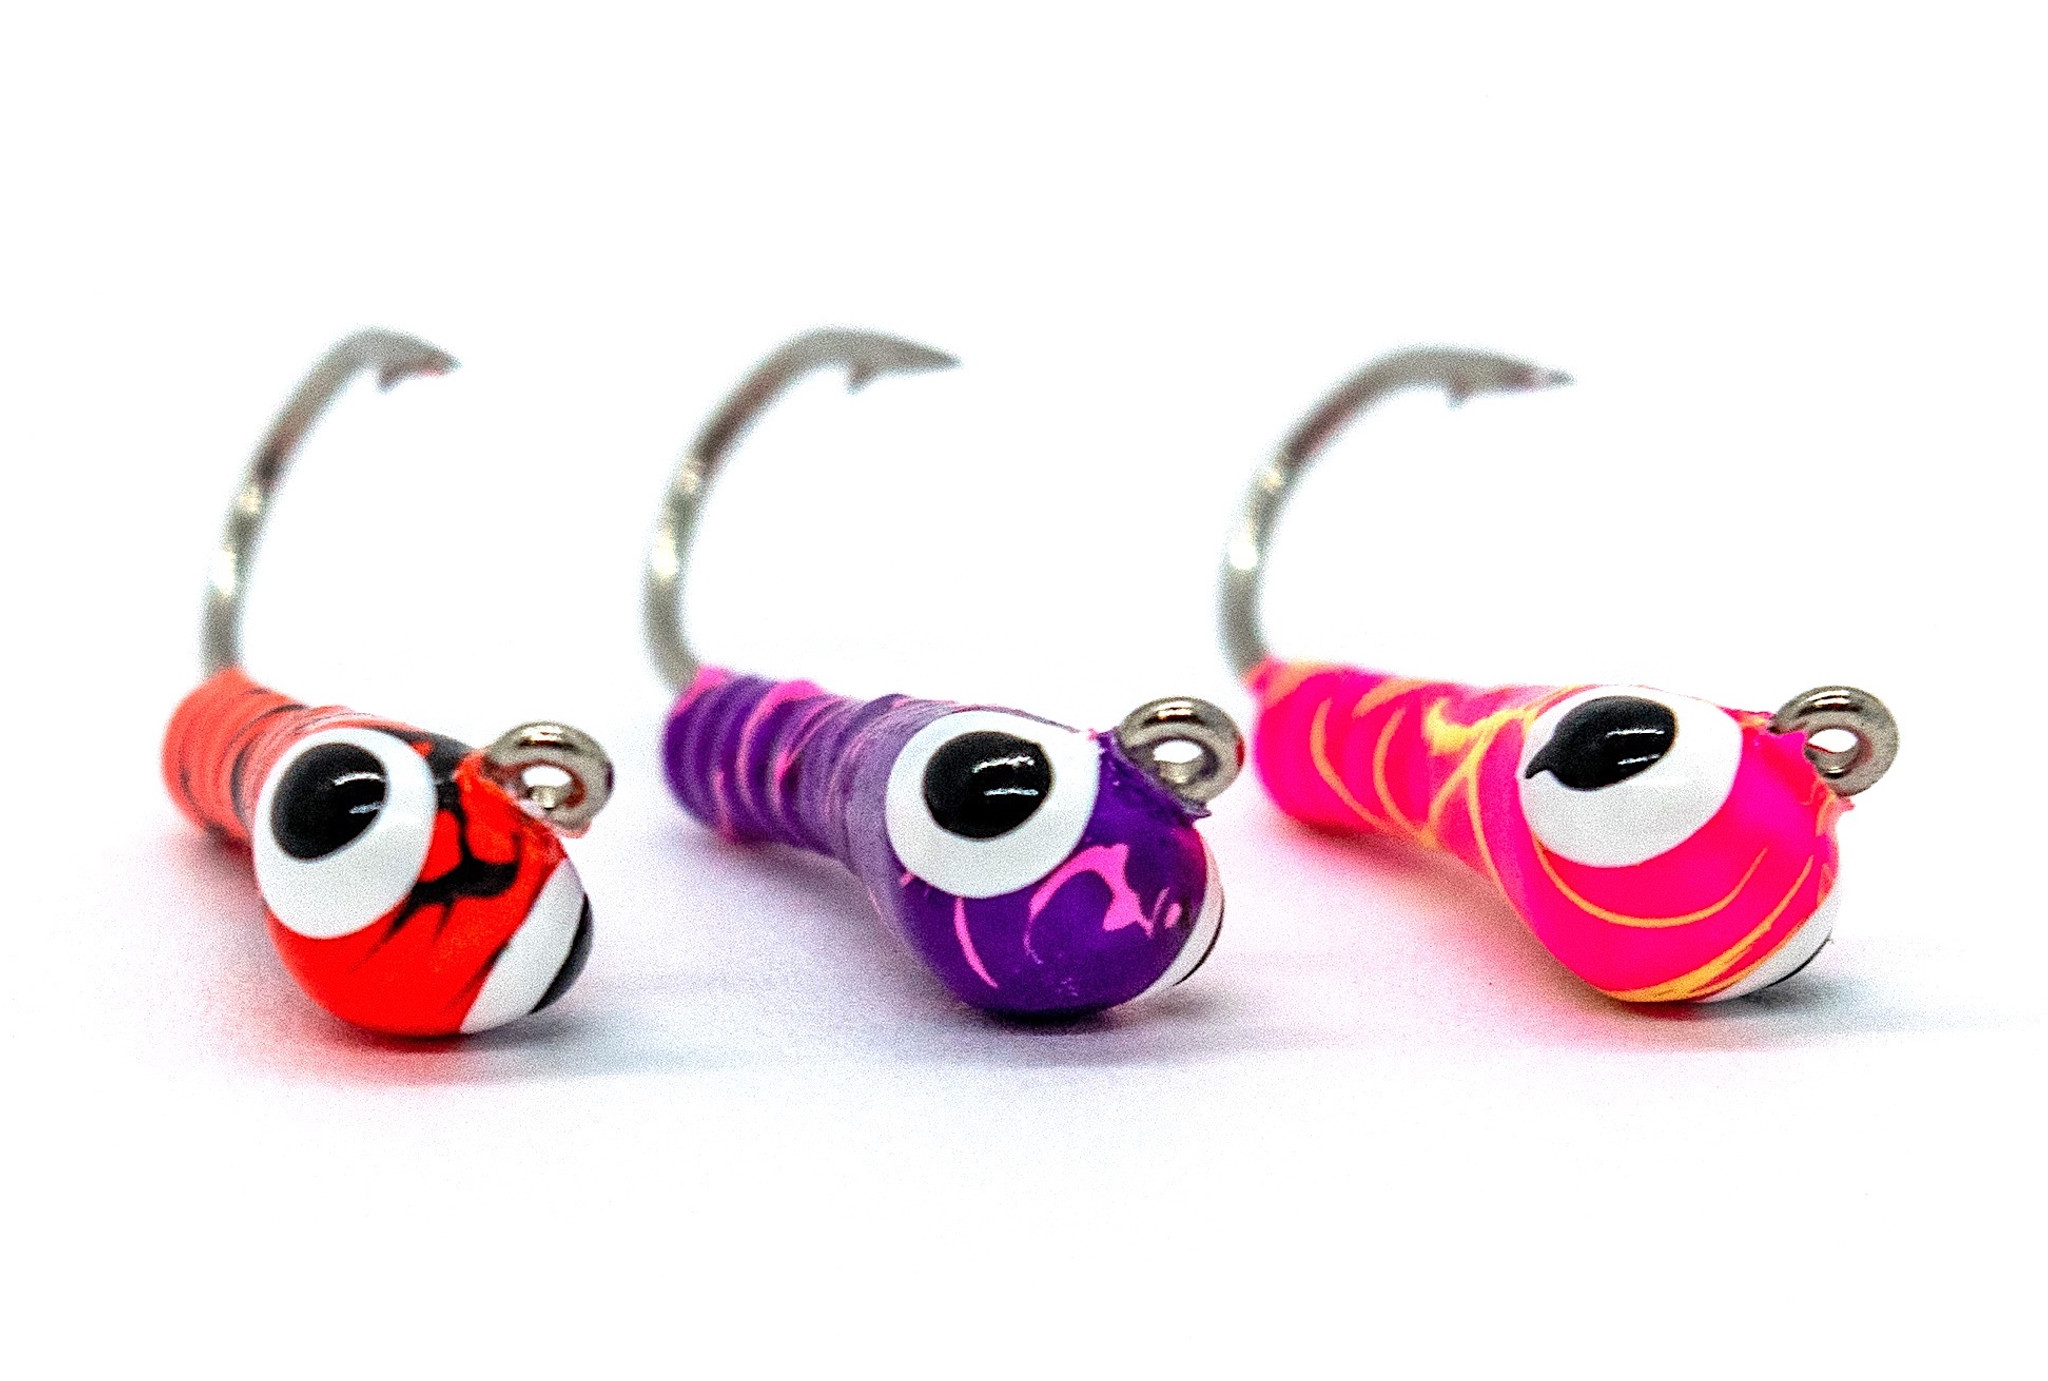 Caddis Cane and Glow Tungsten Jigs For Ice Fishing From Widow